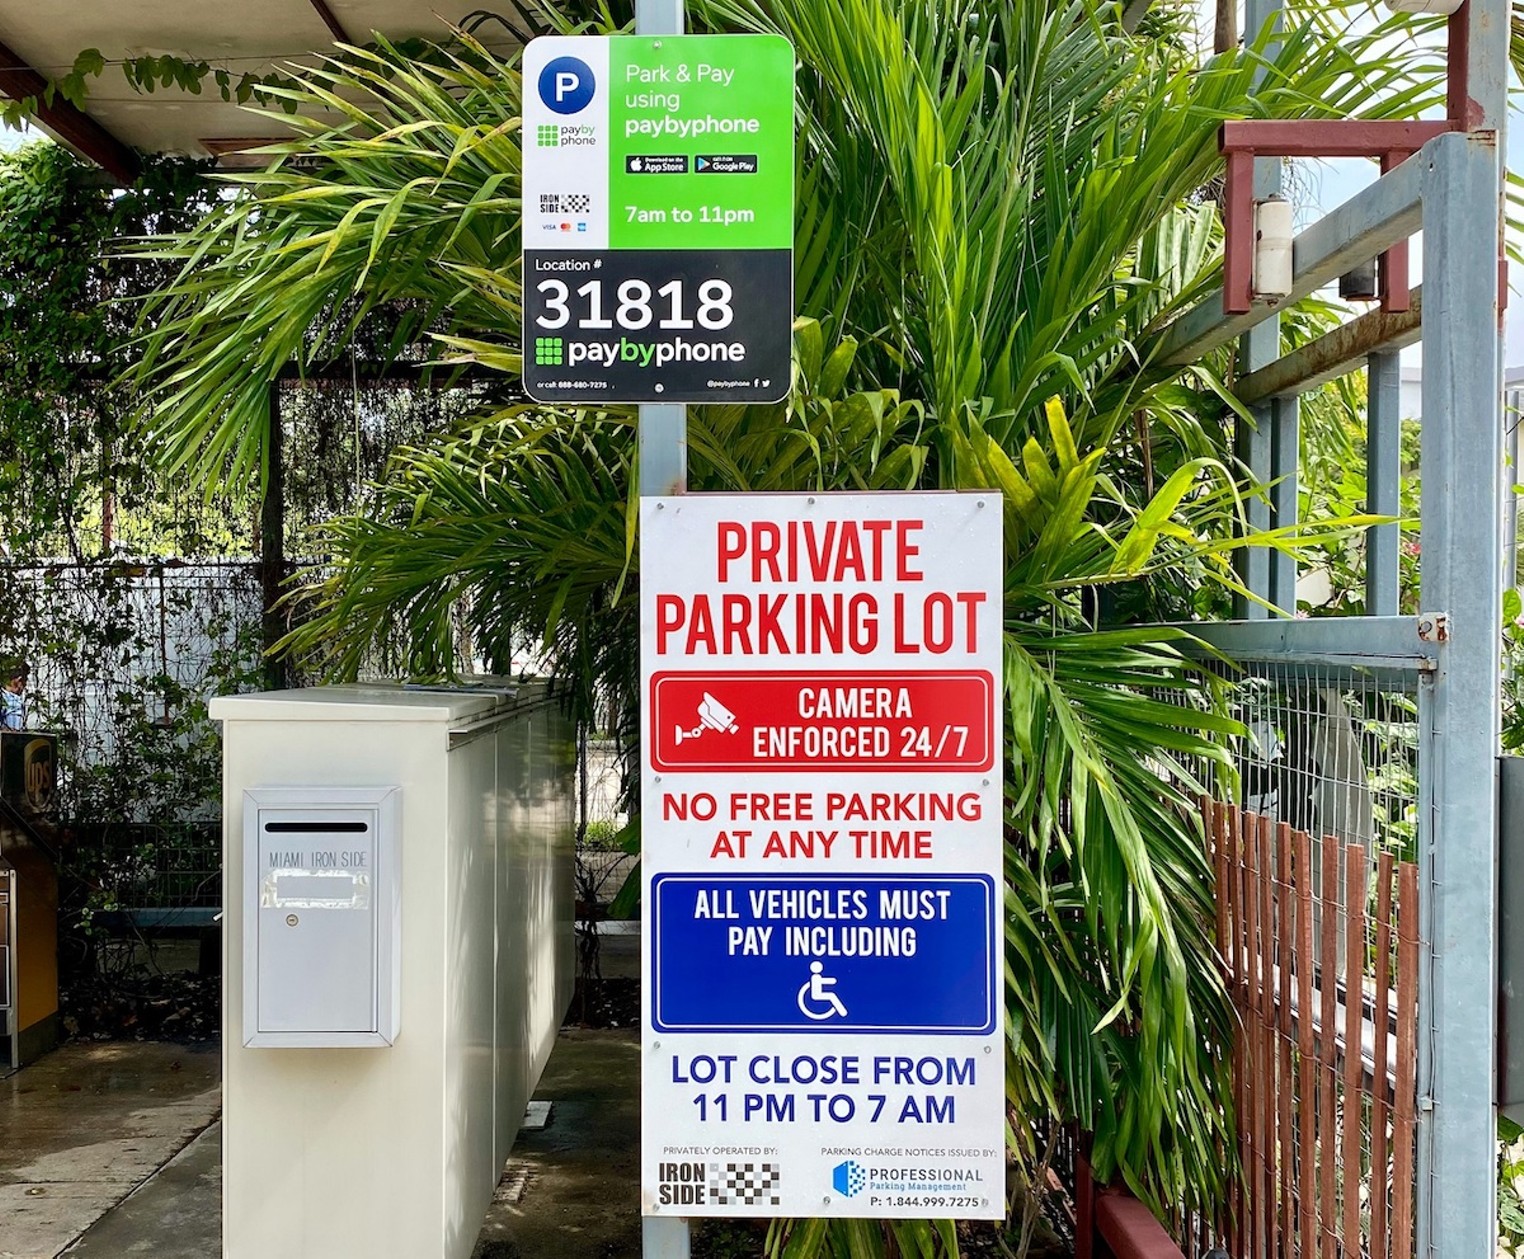 Miami's Parking App Obsession Has Unforeseen Consequences